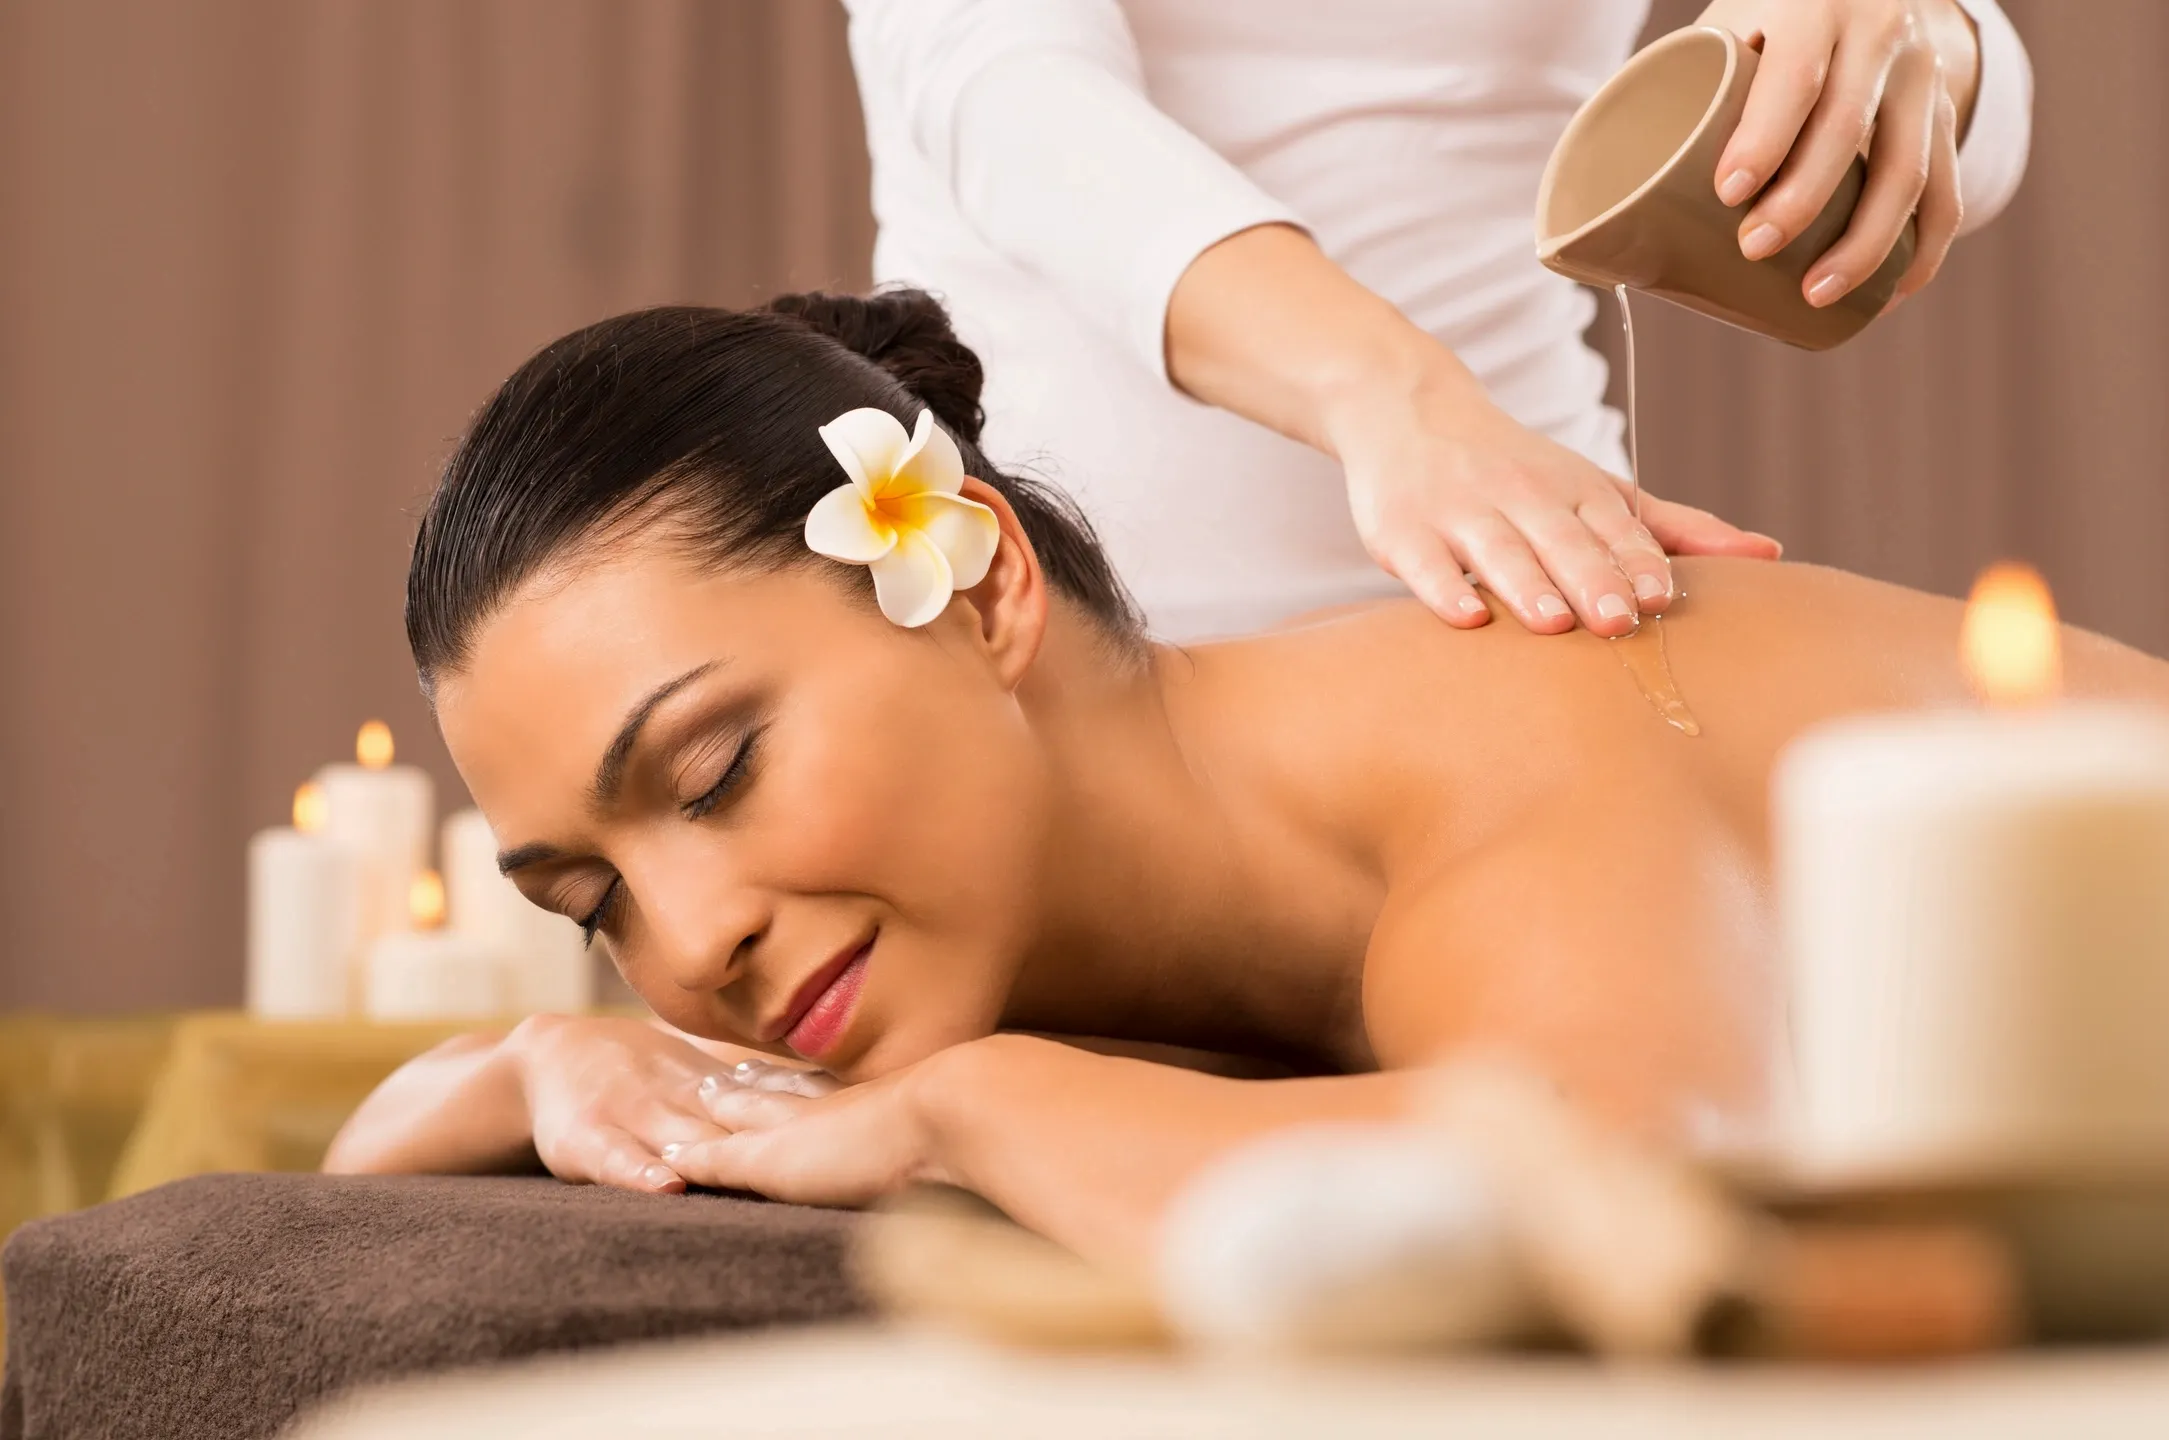 Lotus Massage in Portugal, Europe  - Rated 0.8